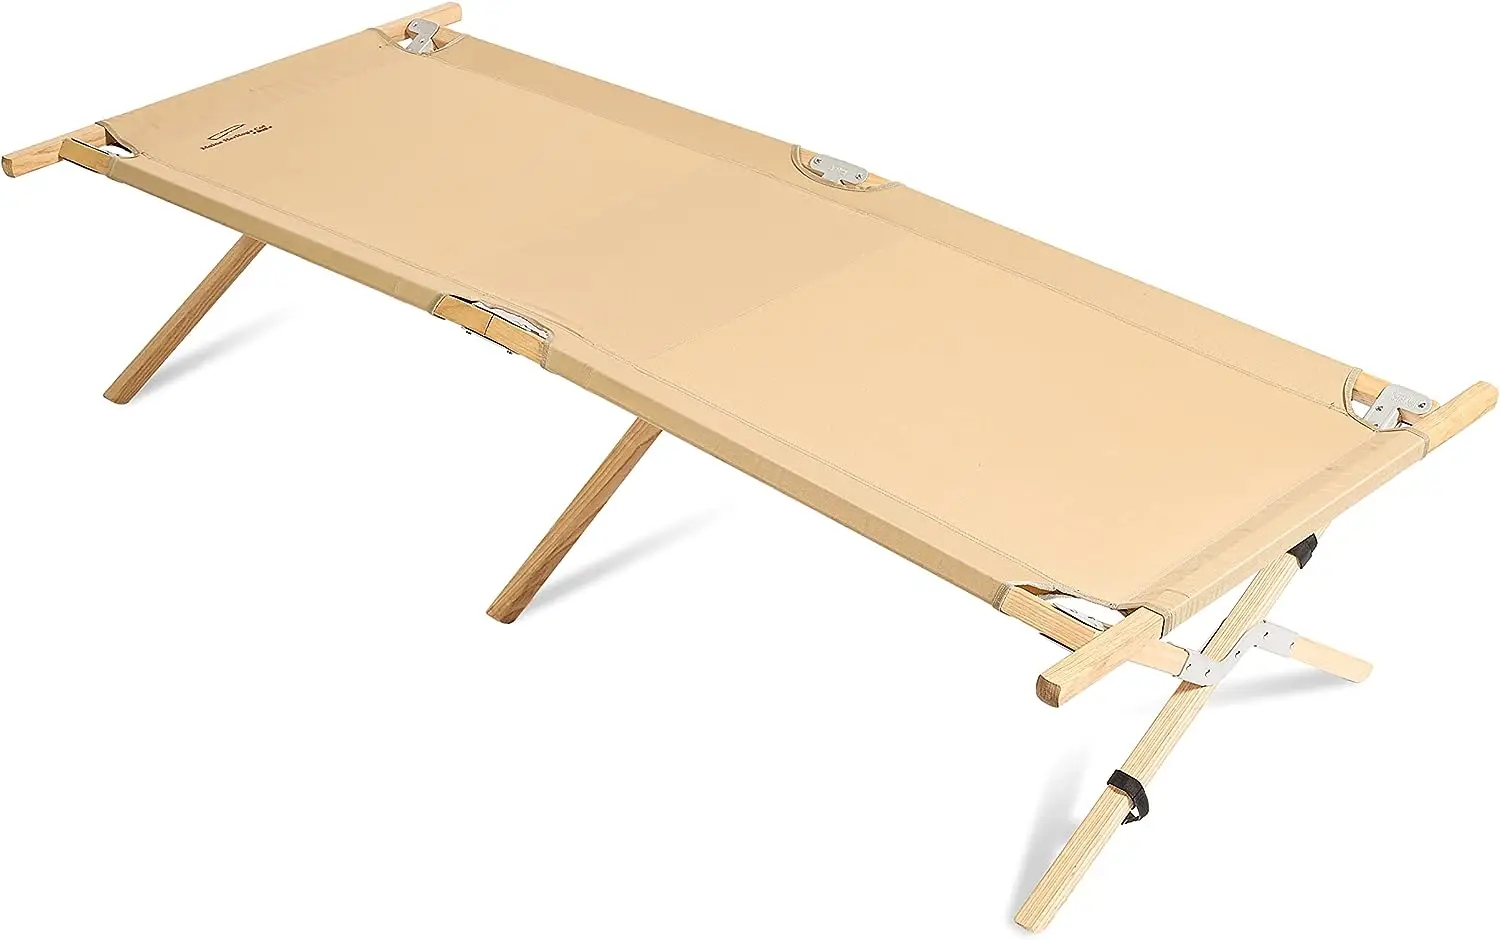 

OF MAINE - Maine Heritage Cot, Folding Camping Cot, 375 lbs Capacity